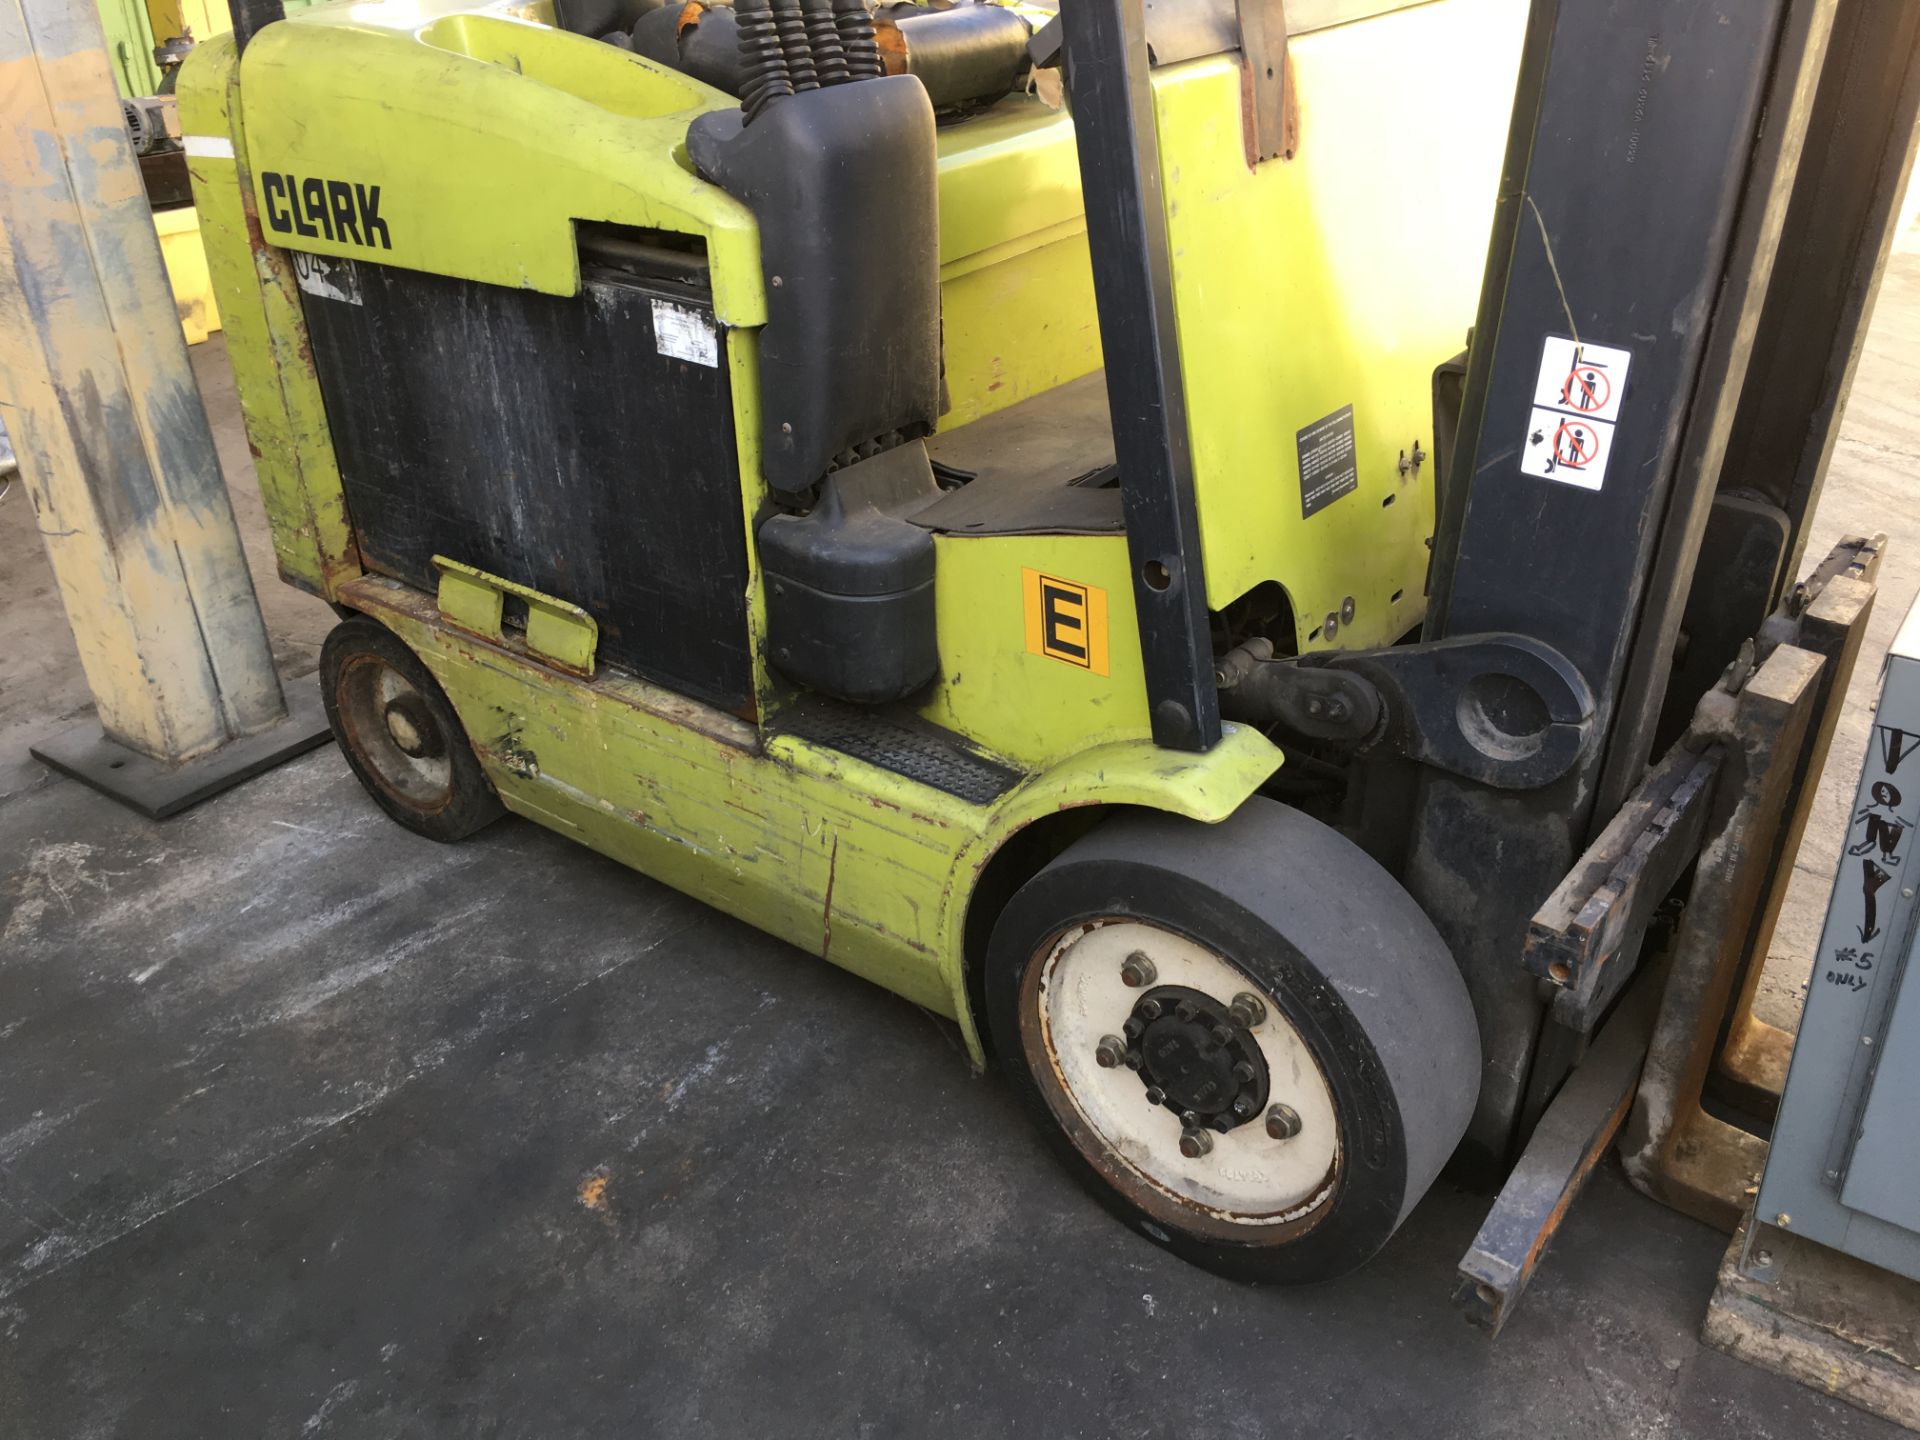 CLARK 4500 LB CAPACITY ELECTRIC FORKLIFT WITH BATTERY CHARGER Loading Fee: 100 - Image 3 of 9